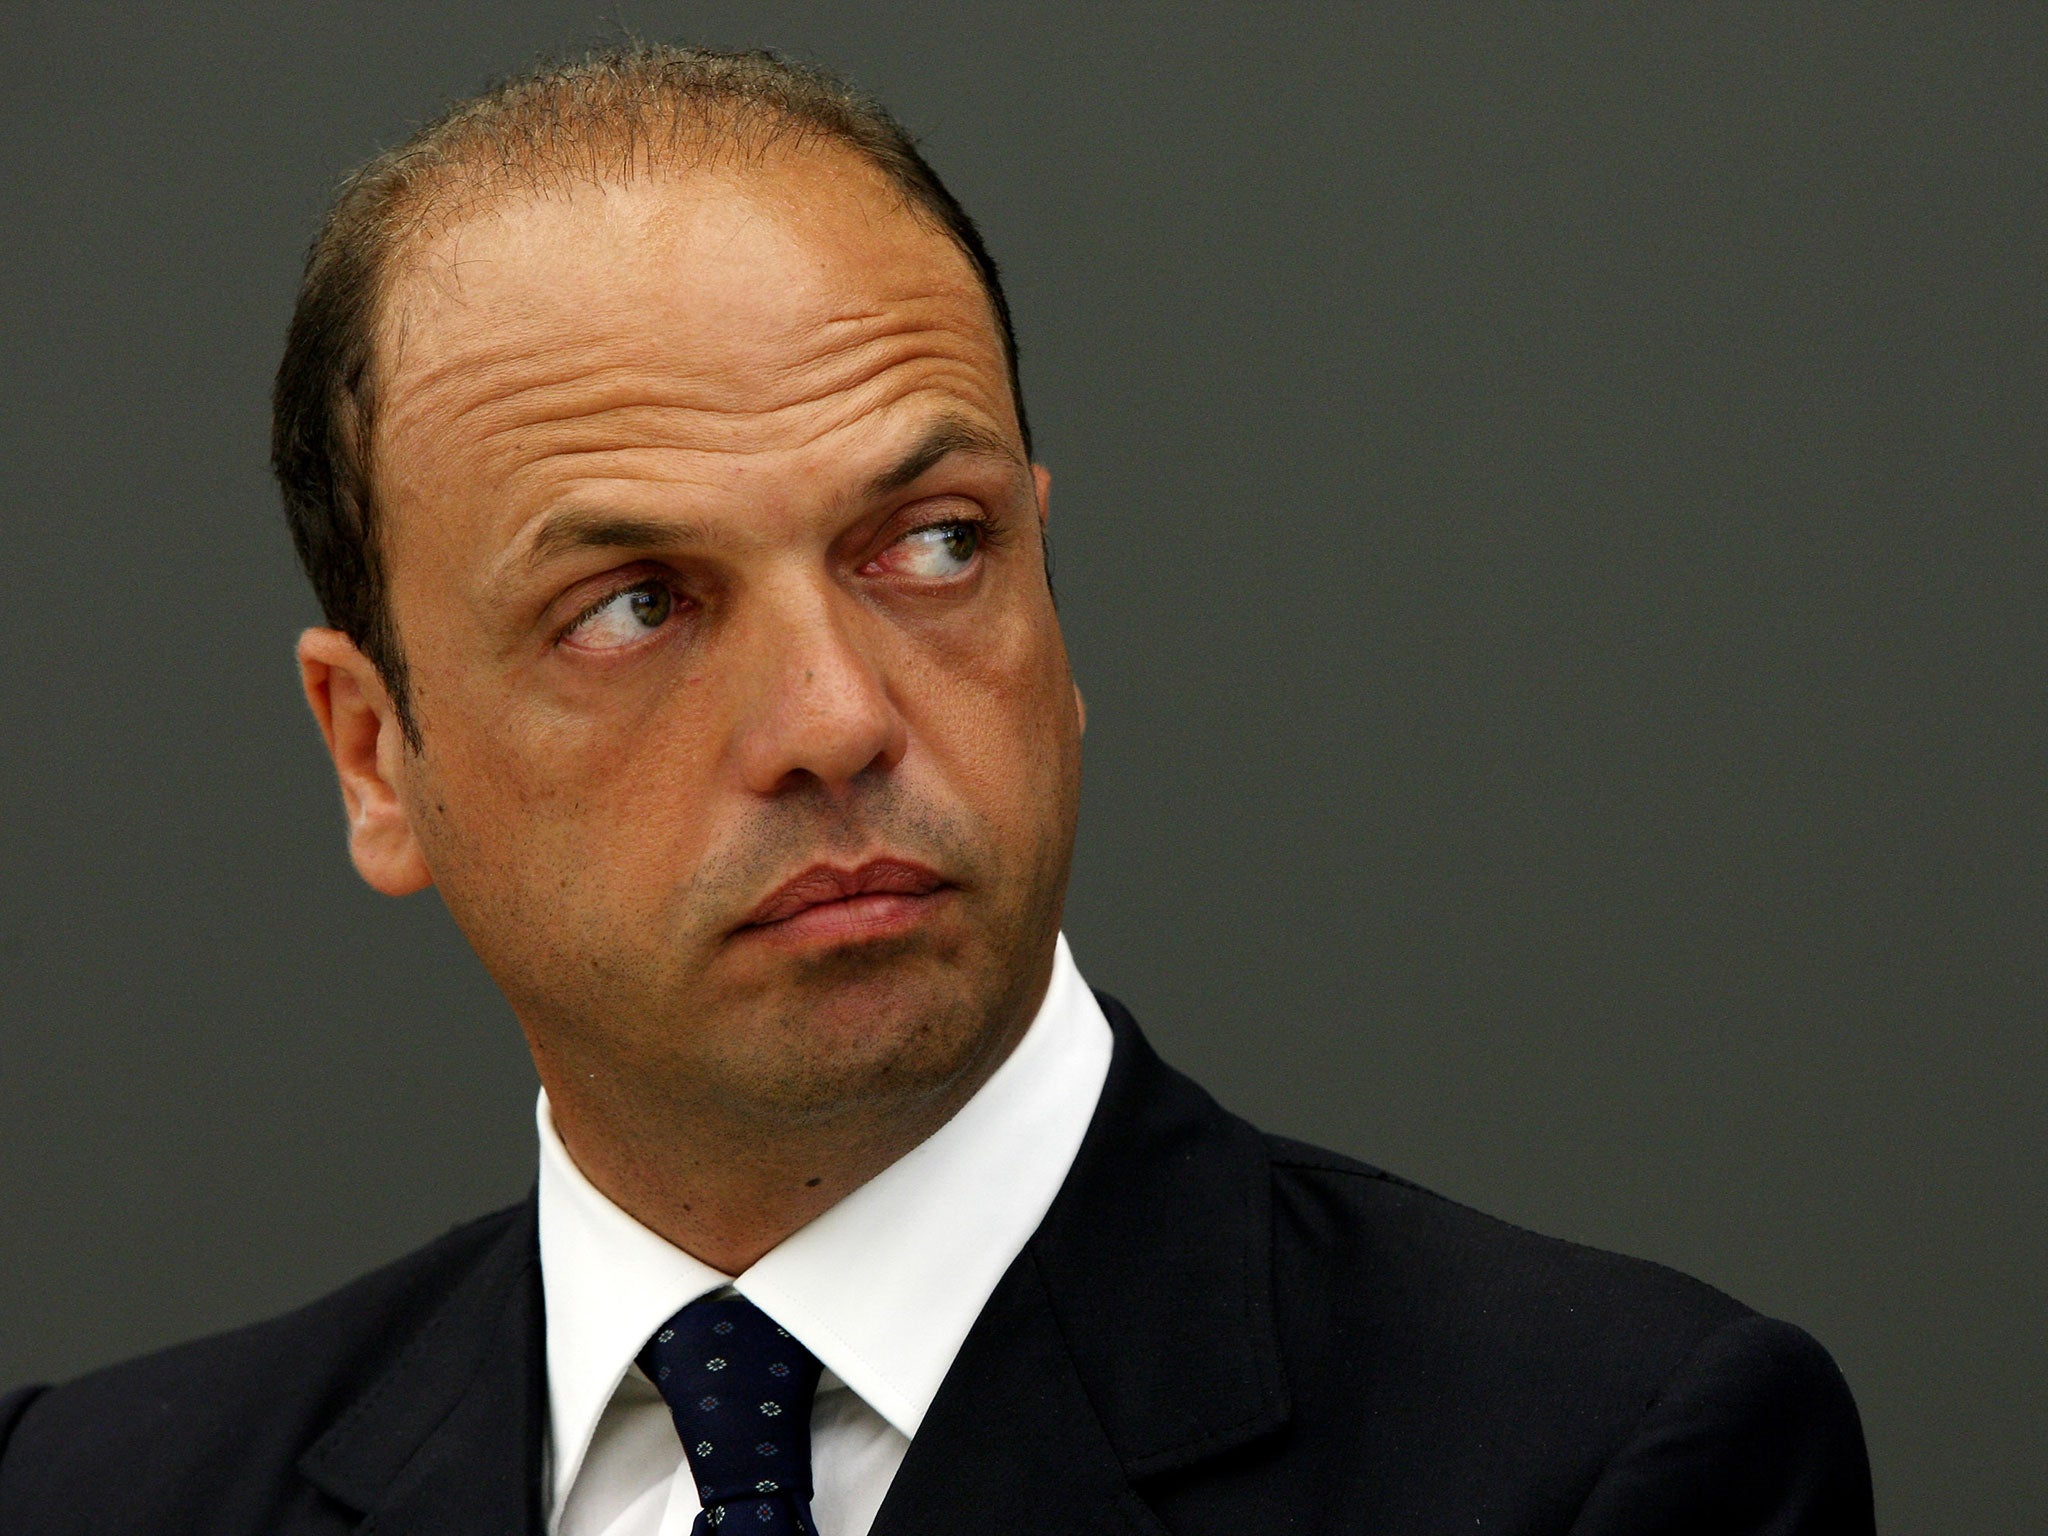 Angelino Alfano, Italy's Interior Minister, has previously insisted there was no evidence that Islamic terrorists were sneaking into Europe aboard migrant boats